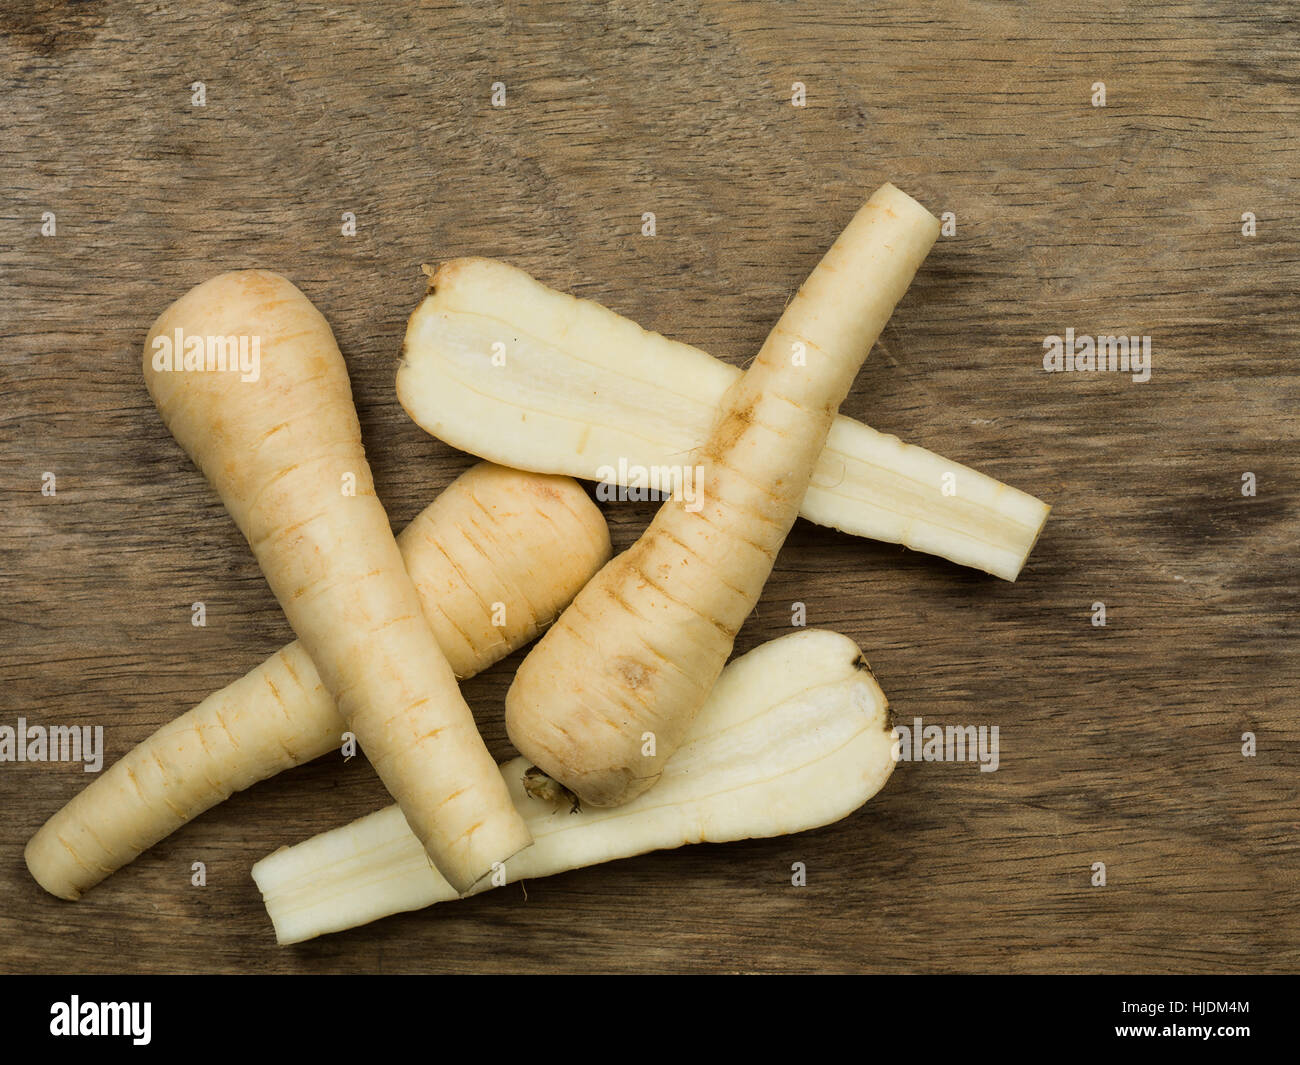 Fresh Uncooked Parsnips Cooking Ingredients Stock Photo